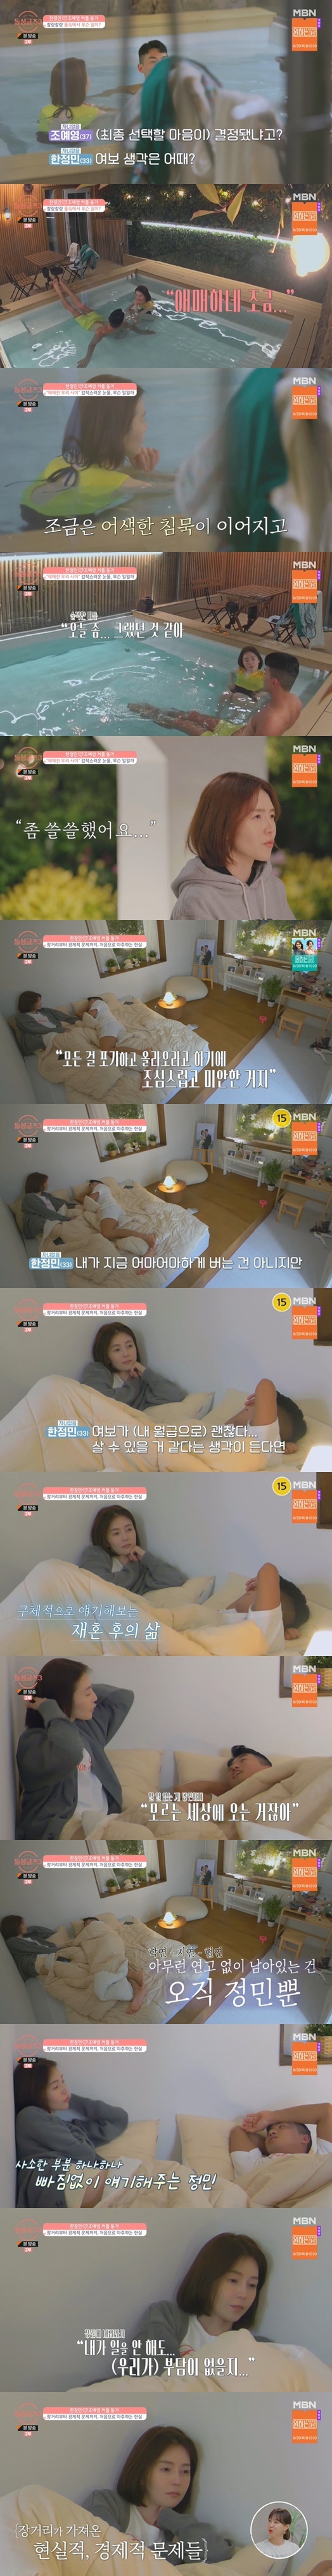 Seoul) = Cho Ye-young brought up realistic stories about Min Jung freezing the sweet mood that Kiss was dominating.Singles 3, which was broadcasted on MBN at 10 pm on the 21st, included the appearance of Hyun Chul - Hye Jin, Min Jung - Ye Young couple living together.After the start of cohabitation, Kiss was overflowing with affection for each other. For a while, the two of them in Haruman, cohabiting, took out realistic topics and made the atmosphere somewhat frozen.Especially, Yeyoung, who lives in Ilsan, faced the reality that if he remarried Min Jung, who is located in Changwon station, he should leave everything and settle in a strange place.Ye-young felt afraid that if he came to Changwon station, he would have to live and look at Min Jung without working.They talked truthfully about this, not avoiding it. It was a necessary time for the two people who had only love.On this day, Cho Ye-young saw off a Min Jung who was going to work from dawn and went to meet Min Jung at home all day in Haru,Min Jung took Ye Young after the Off work to go to his high school school, went to a regular eel house, and shared memories with him.Later, the two men returned to the house together and continued Date in the open-air bath, where they continued their sweet skinning and began a rather serious conversation.Min Jung asked, Did you decide your mind? And Ye Young replied, It is ambiguous a little.Min Jung was surprised because it was Ye Young who was going straight to Min Jung.Ye-young confessed, I thought it would be hard and lonely because I only saw you here without academic, delayed, and bloodline. Min Jung fully sympathized with Ye-youngs story.They also talked about the economics, because Ye-young was in reality hard to do new things at Changwon Station.Min Jung said, If I can live with my honey, Im okay. I do not want to put such a burden on you.Min Jung explained the profits he received from his company in detail, and told him about pre-tax income and outgoing costs.Yee Young said, When I went down to Changwon station and started living, I was worried that I would not have to work if I did not work.Min Jung said, If the girl chooses me and goes to the end, her thoughts are important. I wanted to earn a double income because I did not want to fight with money.